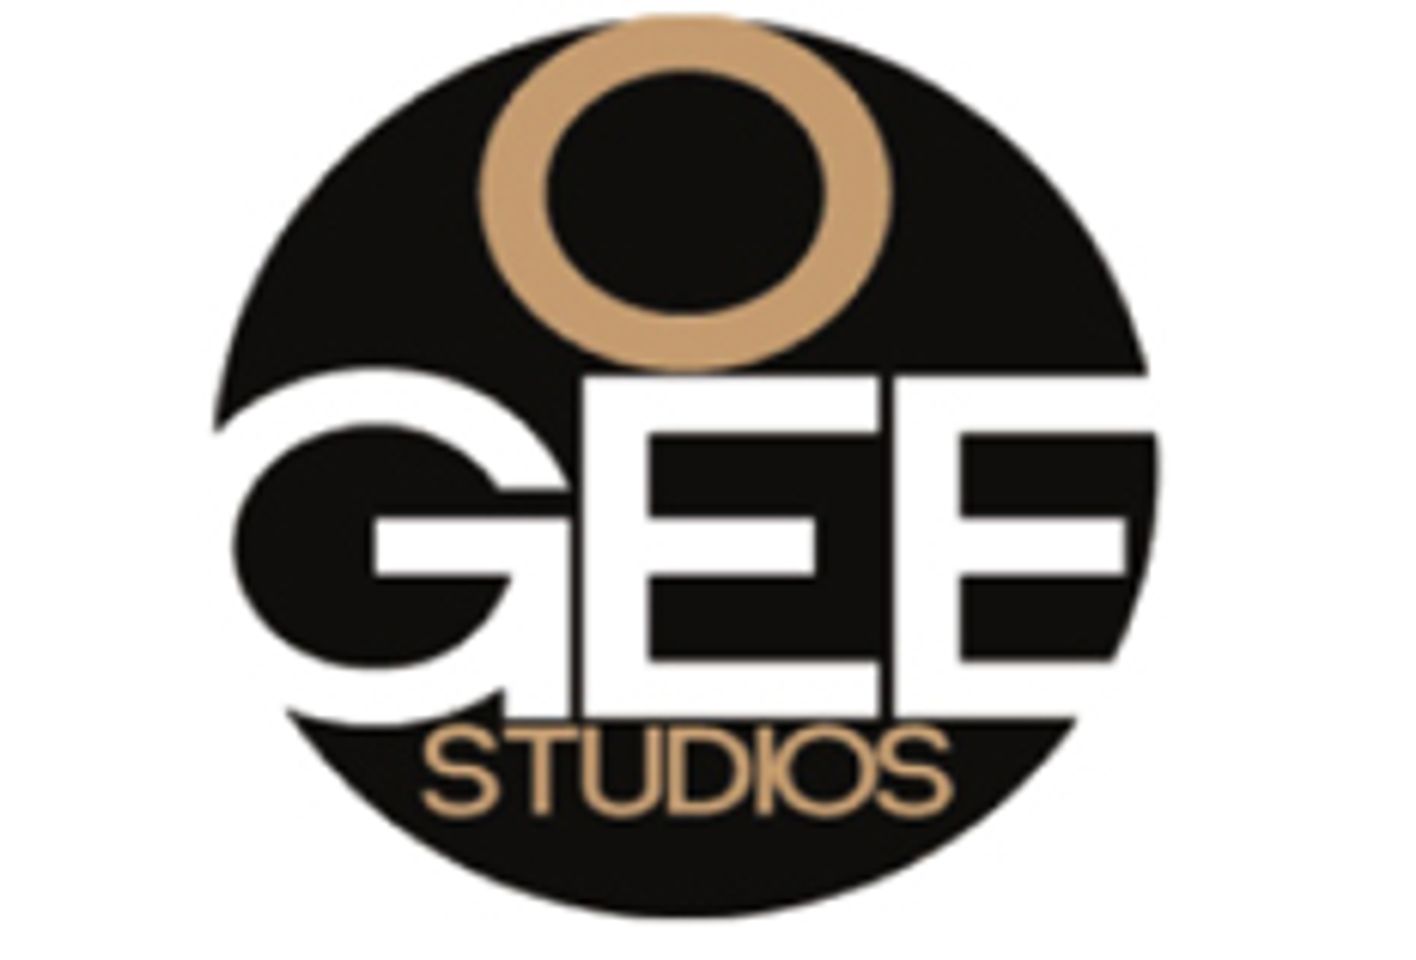 OGEE Studios Rolls Out August Releases